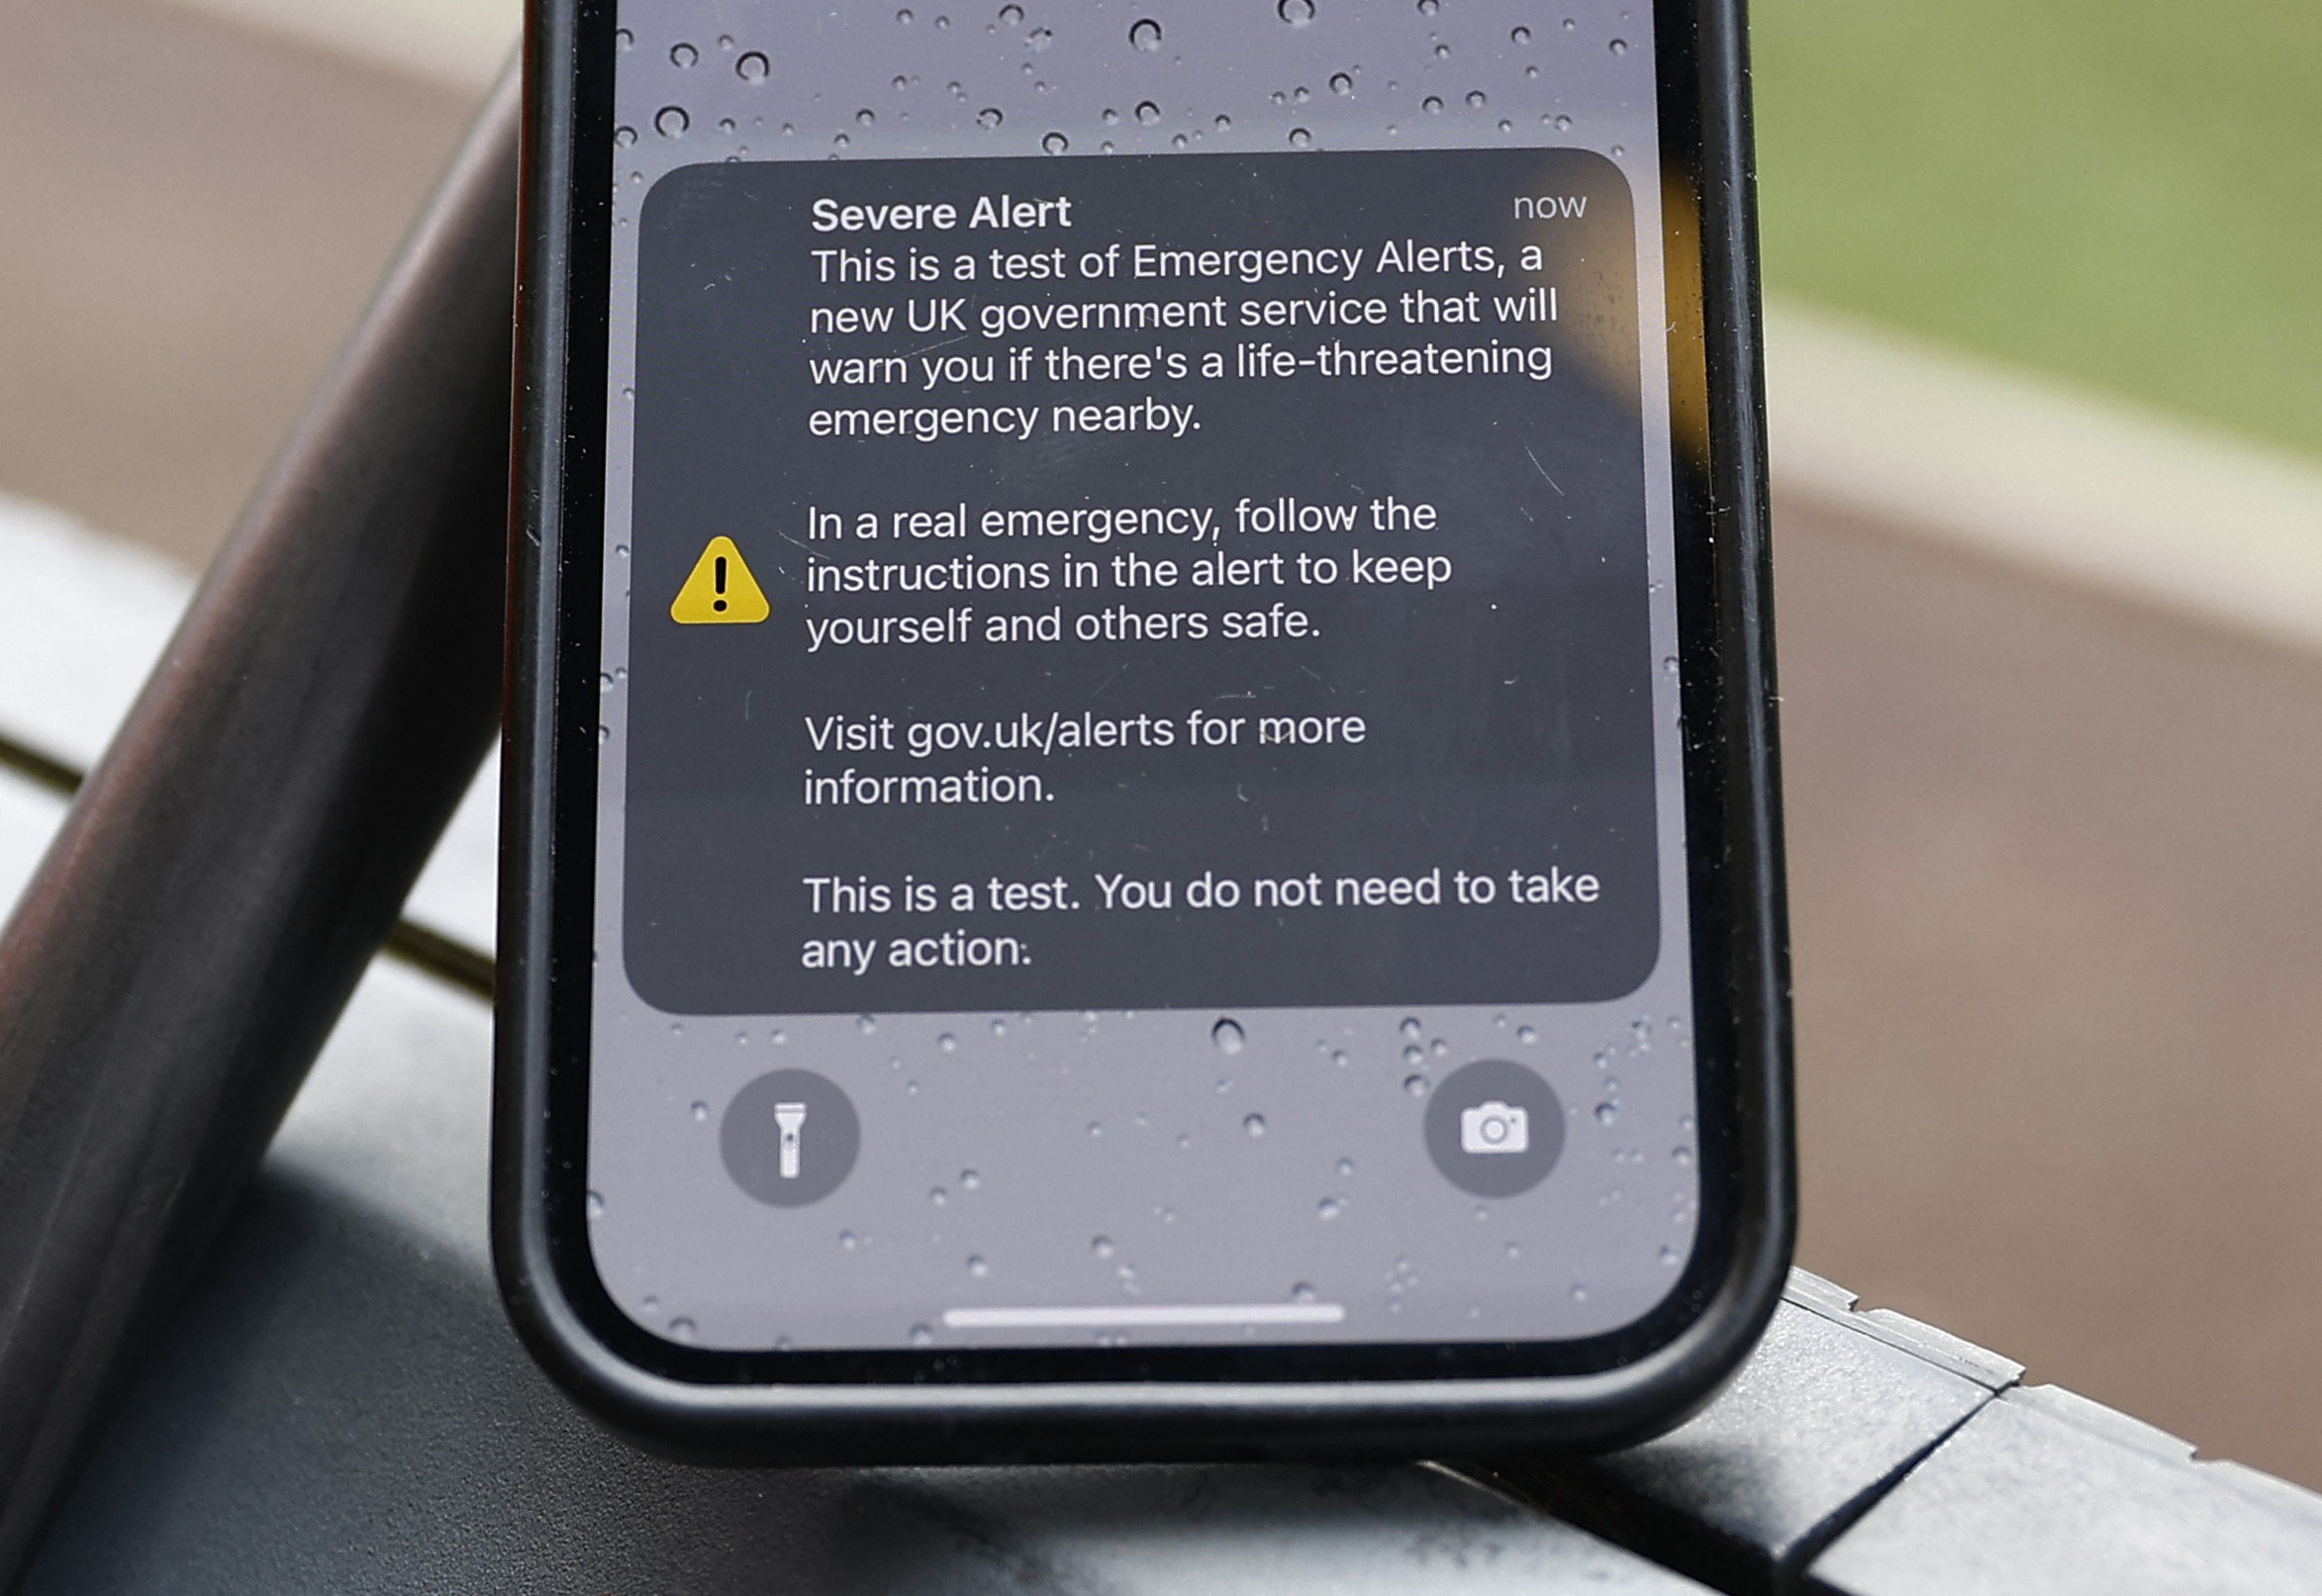 The test emergency alert message sent to mobile phones in Britain on Sunday. Photo: Reuters